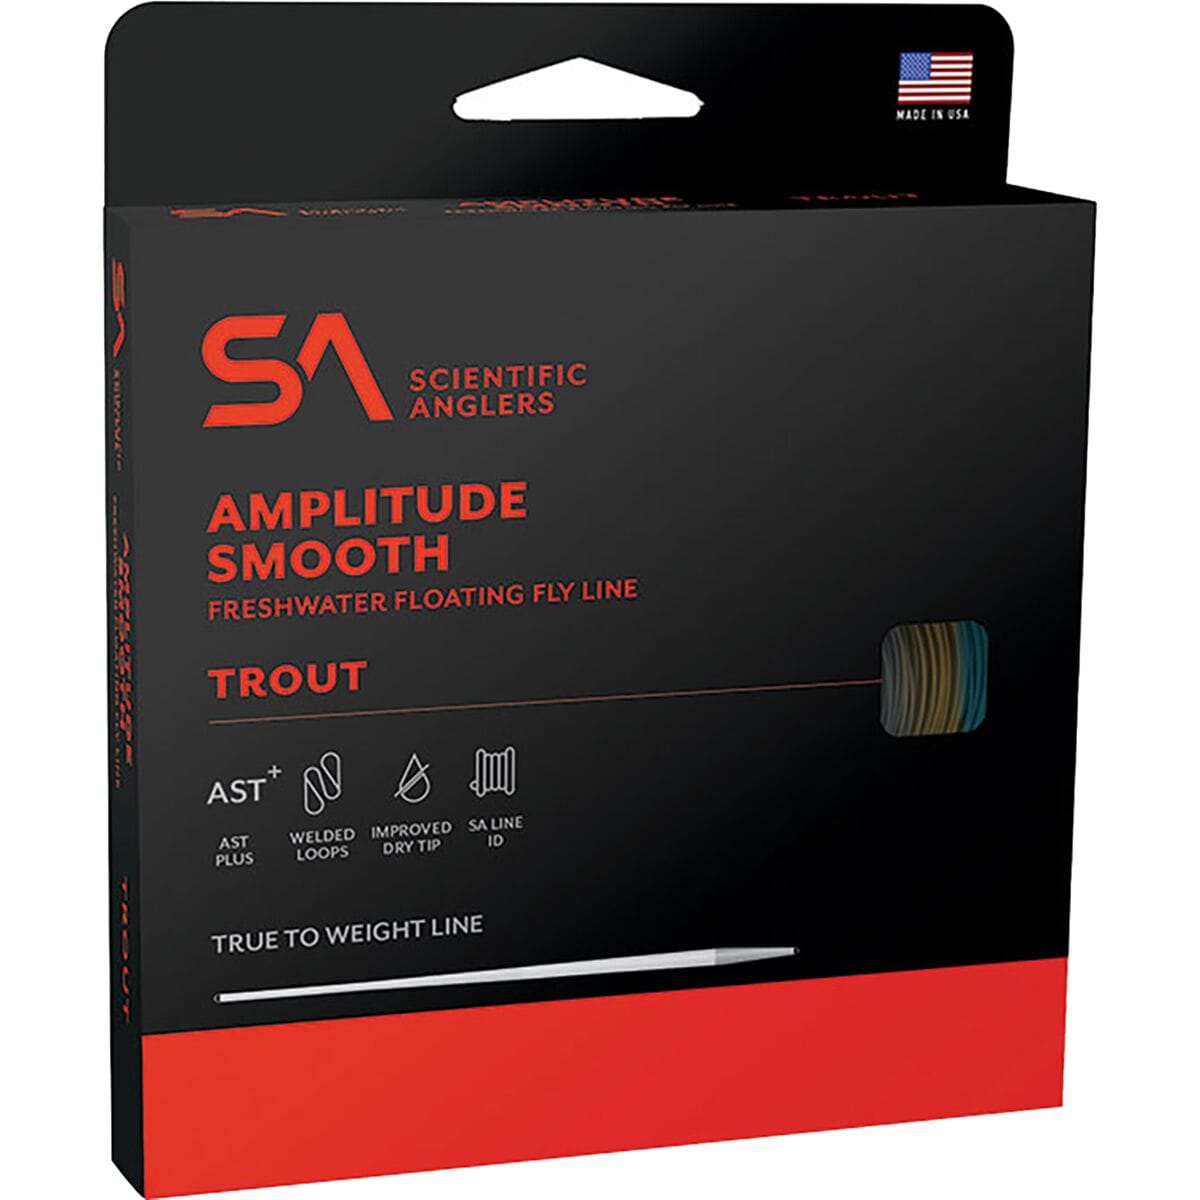 Scientific Anglers Amplitude Smooth Trout Taper Fly Line